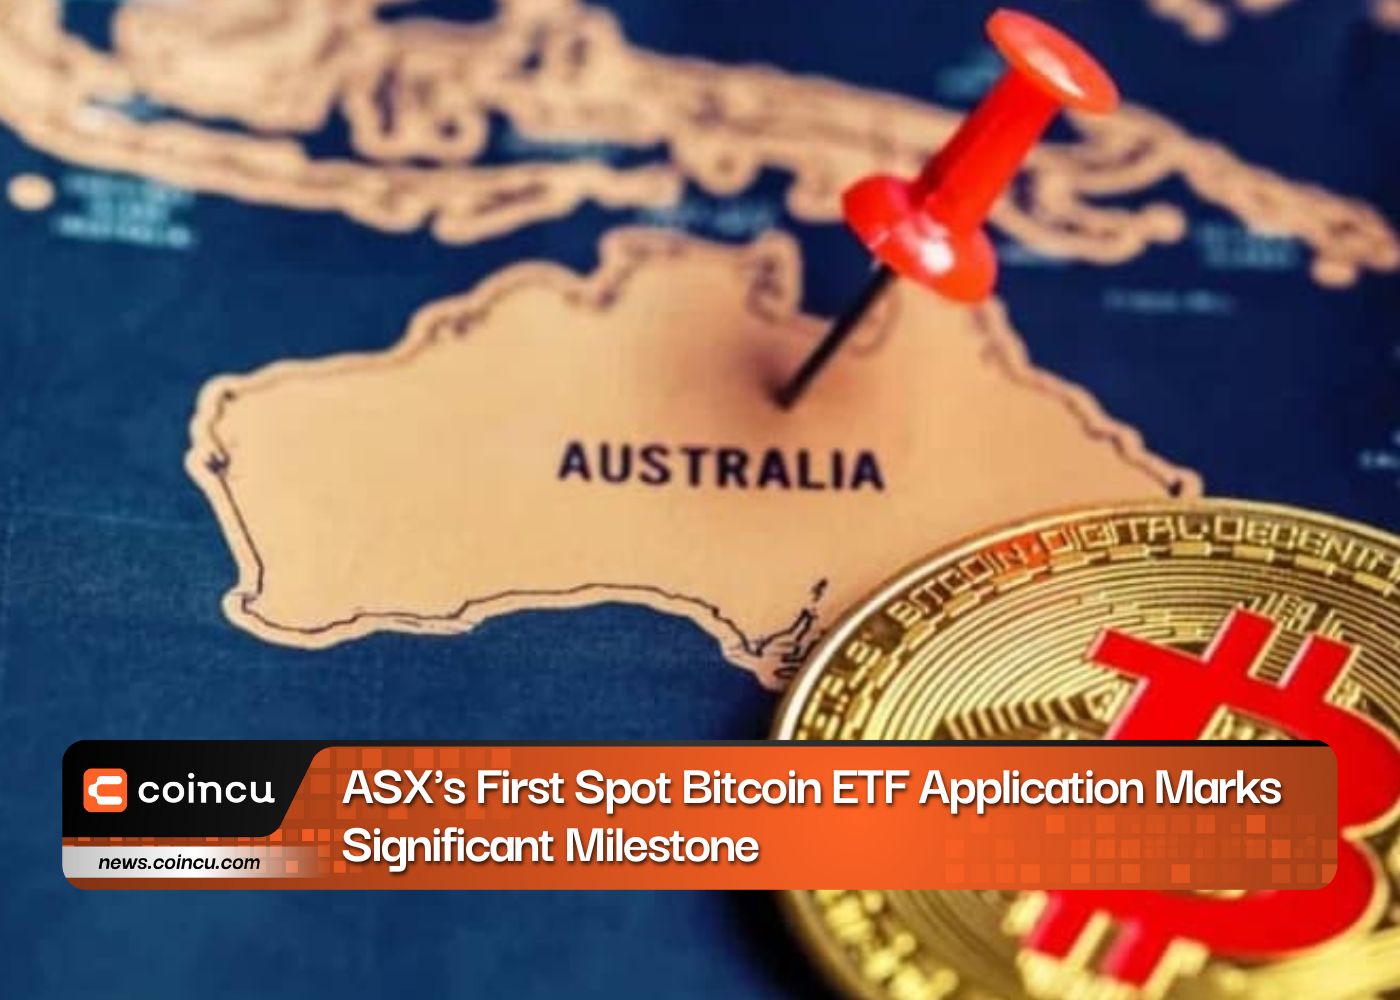 ASX's First Spot Bitcoin ETF Application Marks Significant Milestone